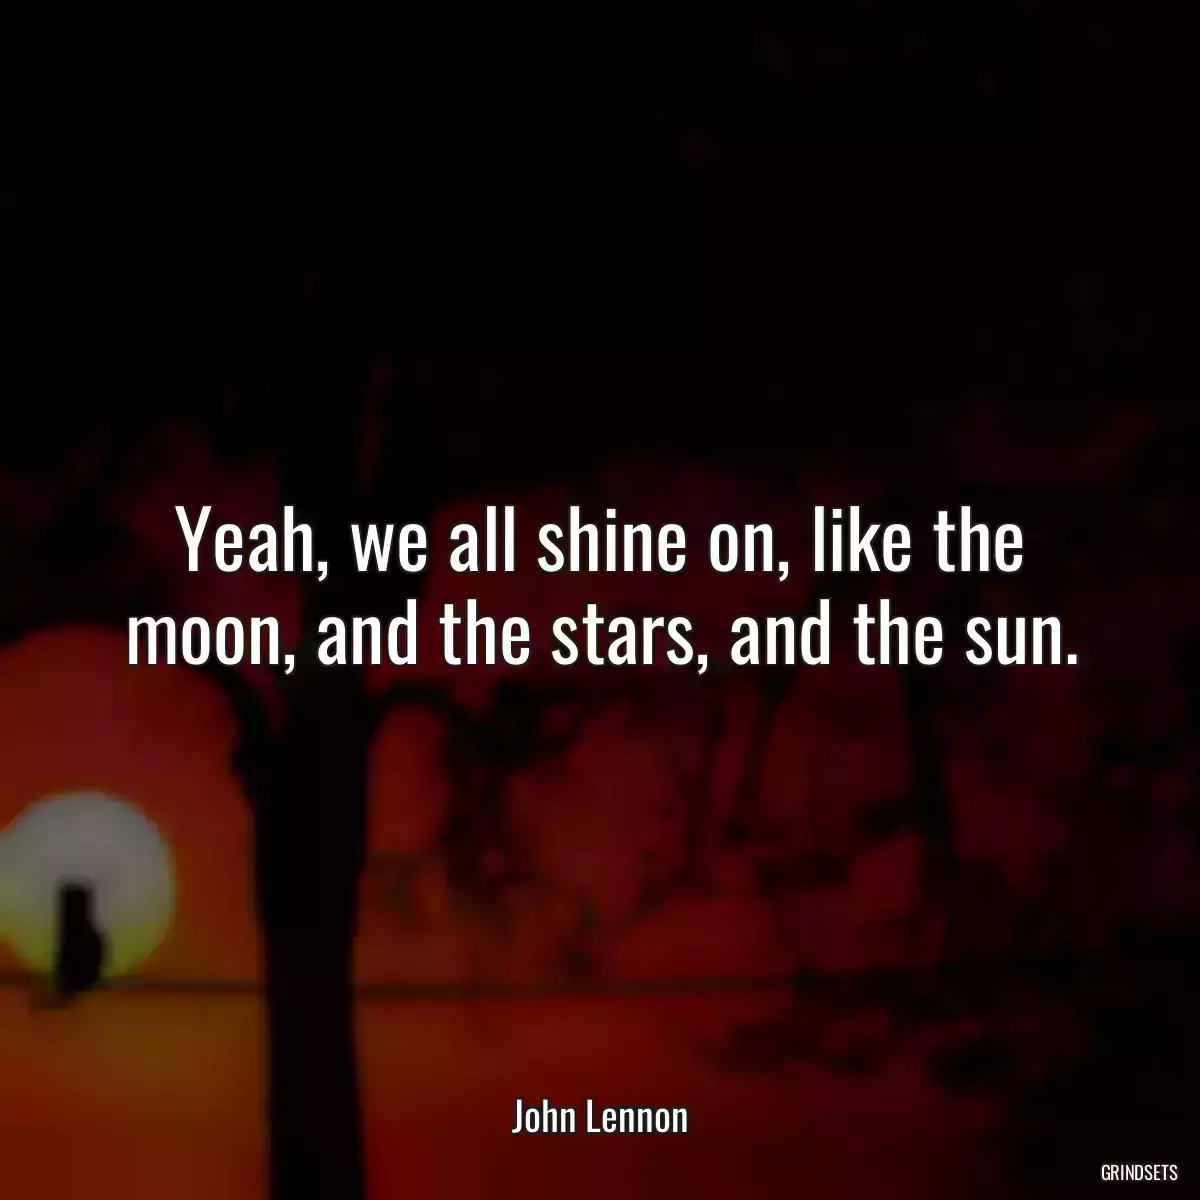 Yeah, we all shine on, like the moon, and the stars, and the sun.